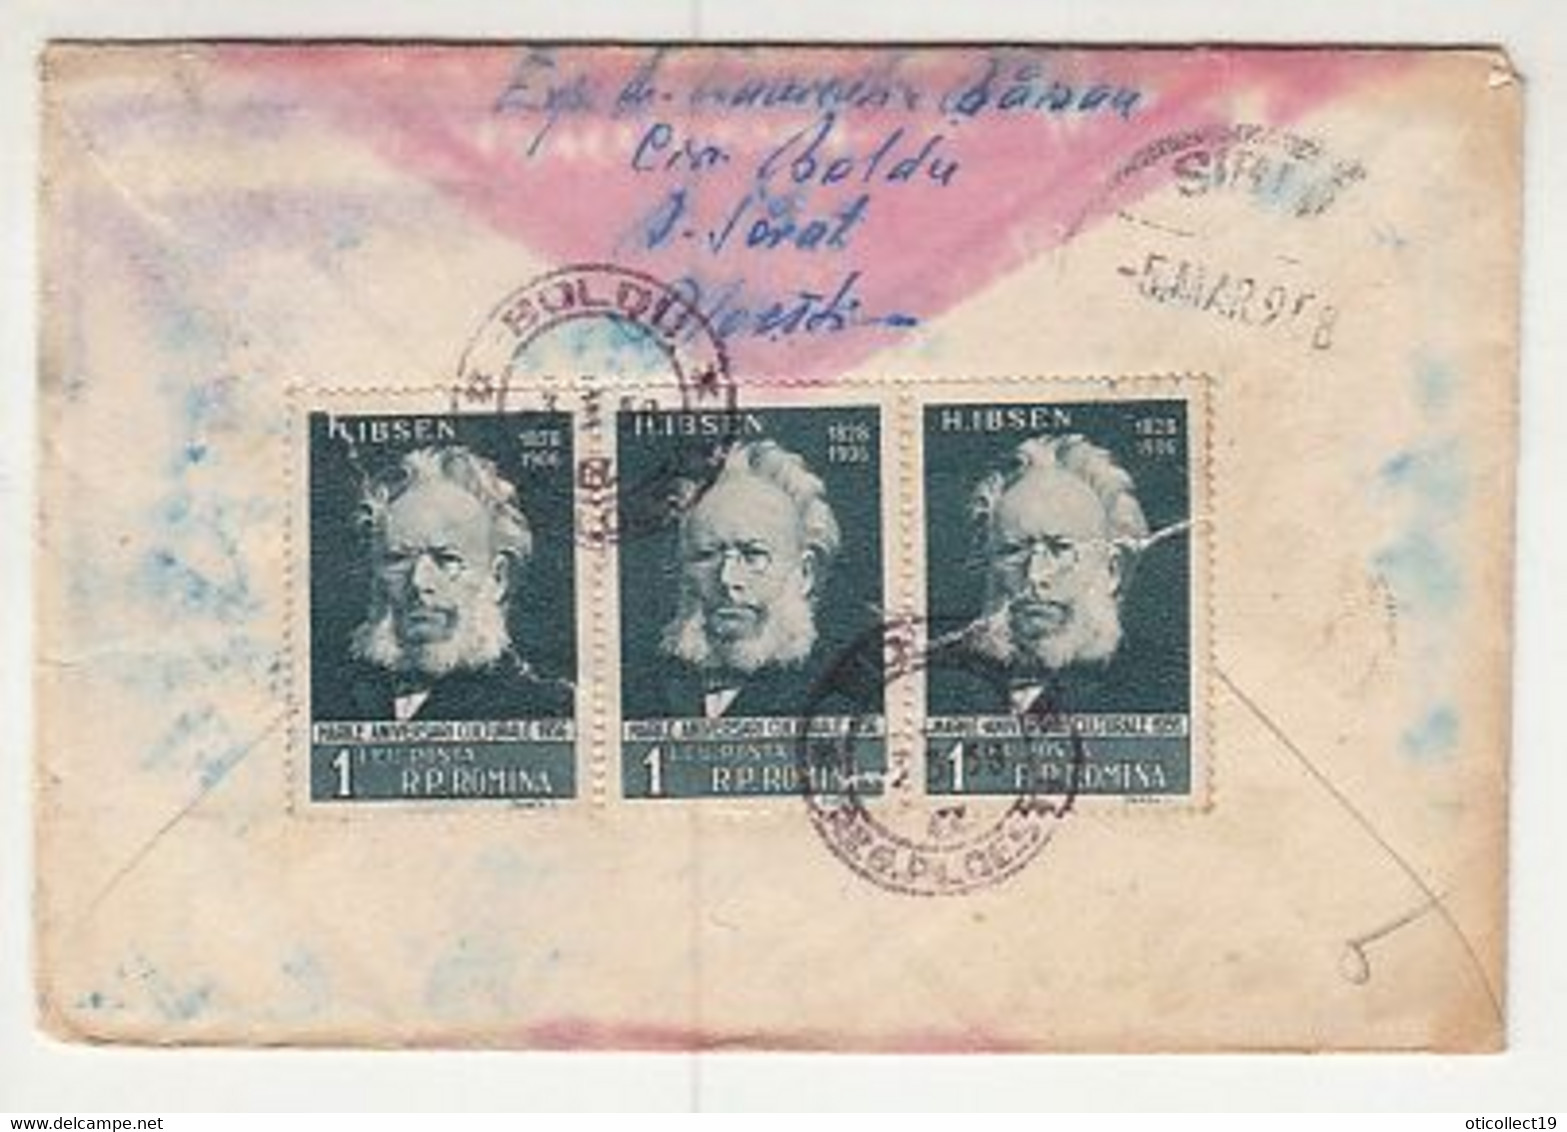 SPORTS, GYMNASTICS, WRITERS- HENRIK IBSEN, STAMPS ON REGISTERED COVER, 1958, ROMANIA - Covers & Documents